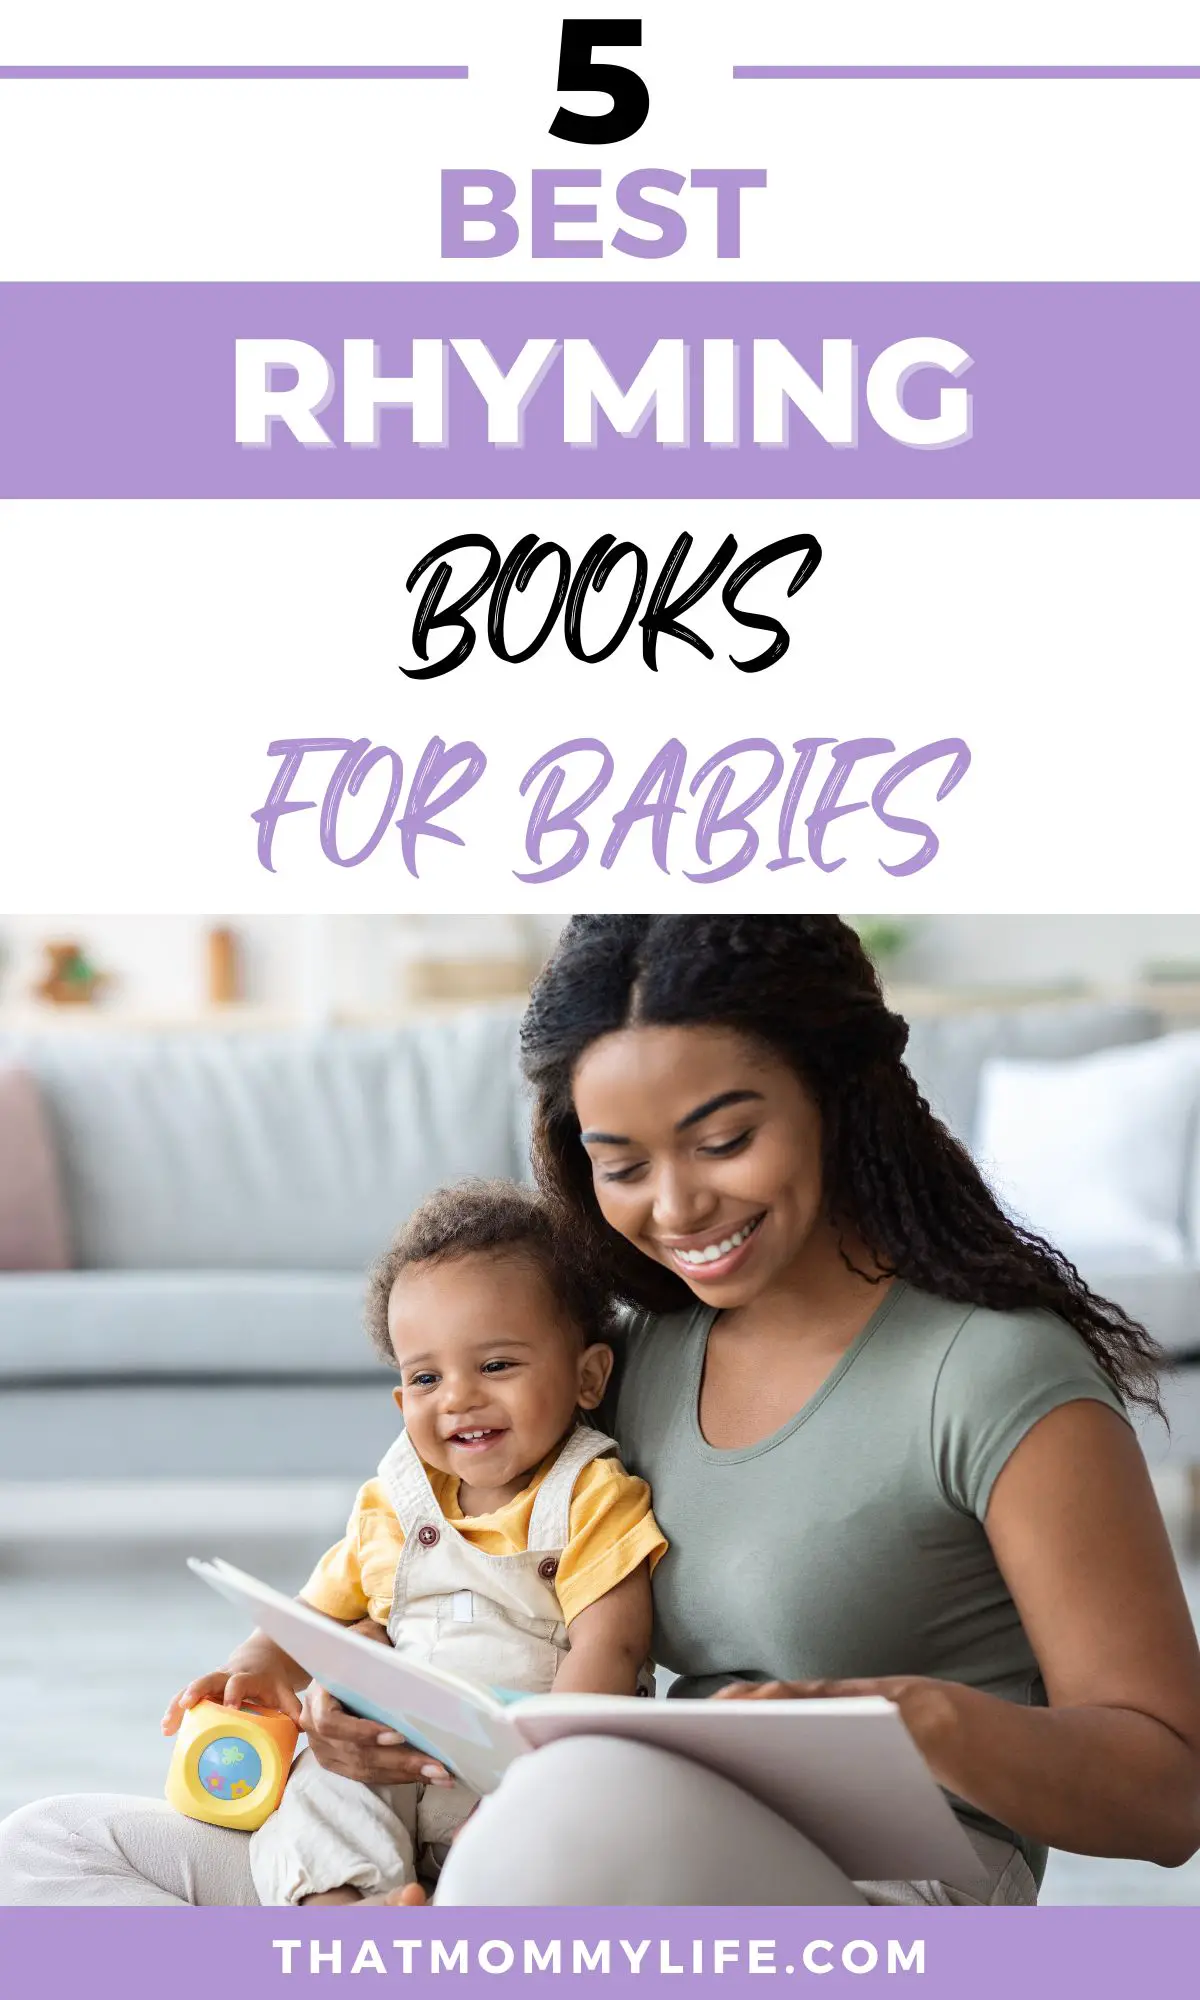 rhyming books for babies